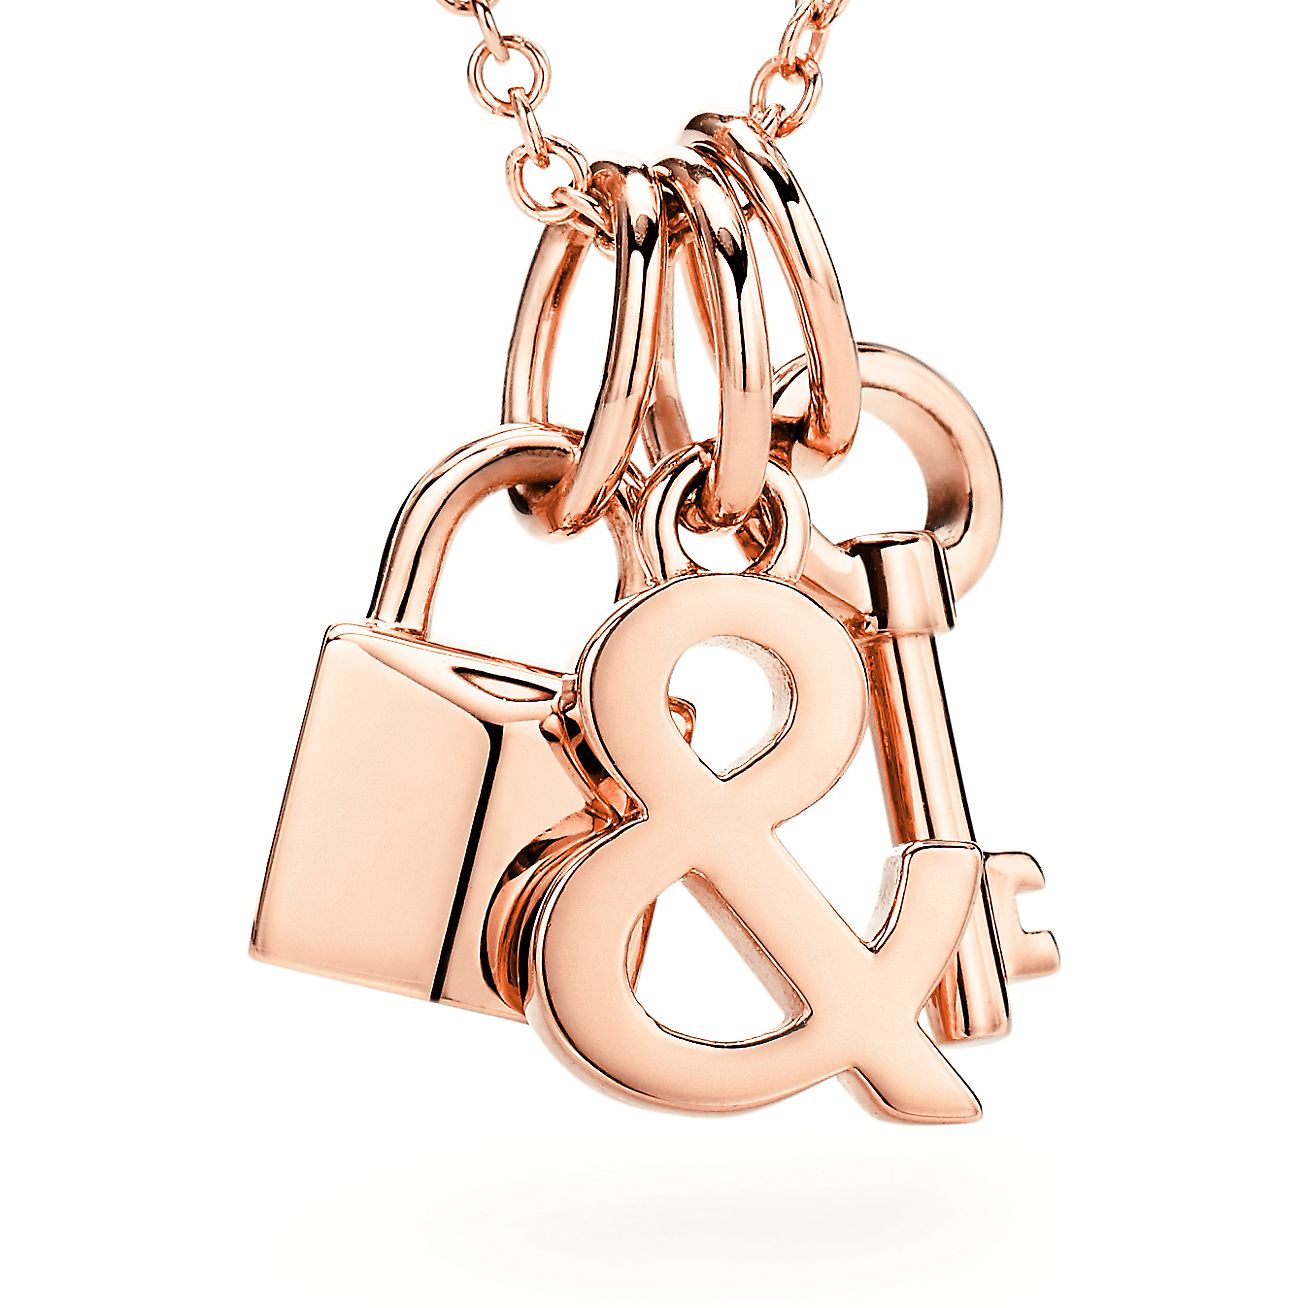 32 Pieces of Padlock Jewelry That Will Hold the Key to Your Heart ...